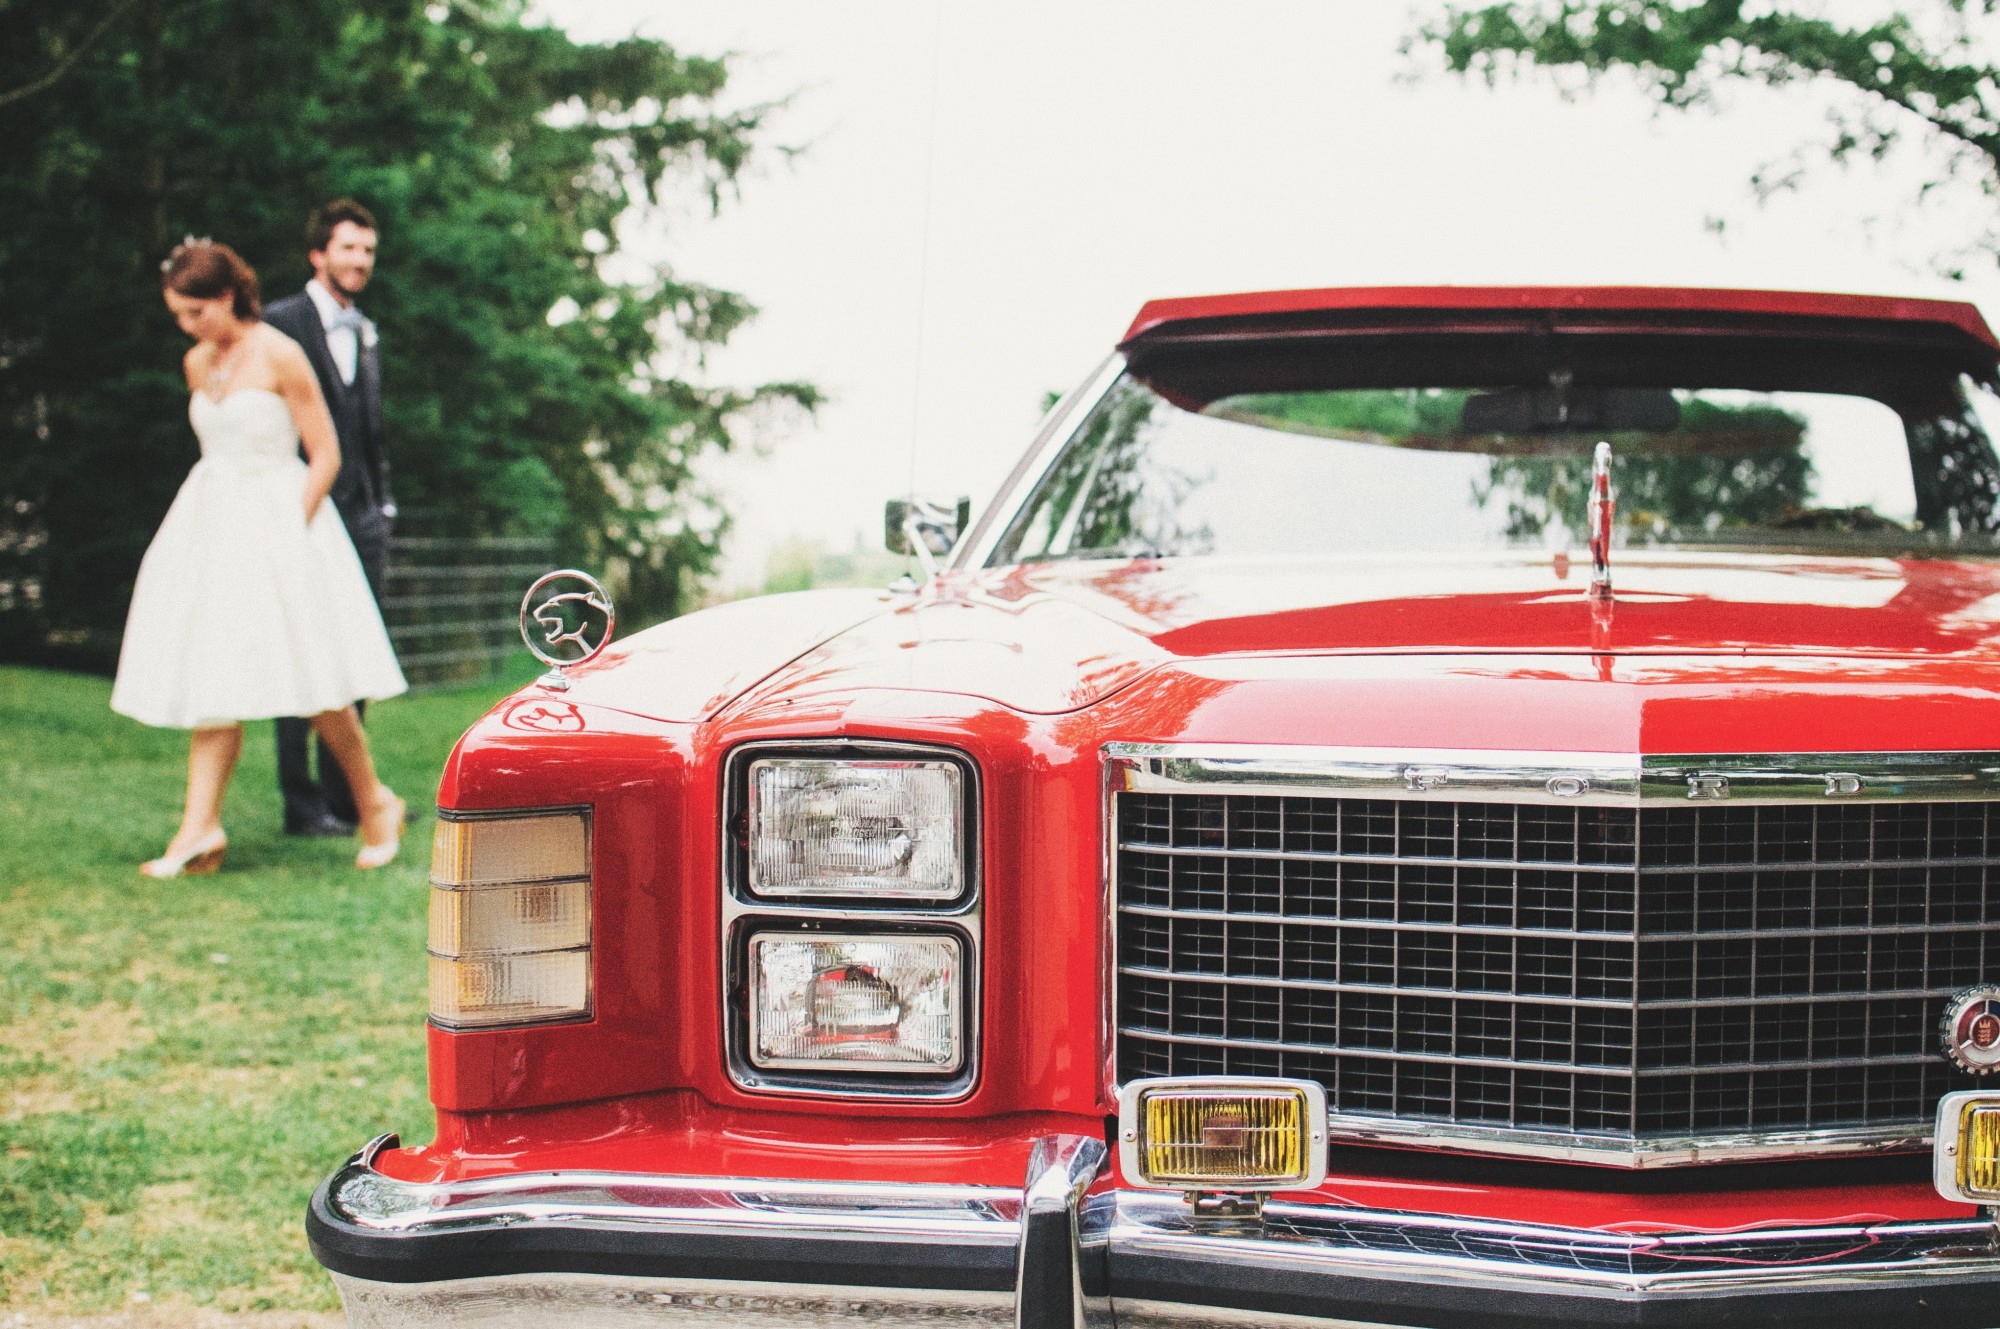 Tips for Hiring the Best Limousine Company for Your Wedding